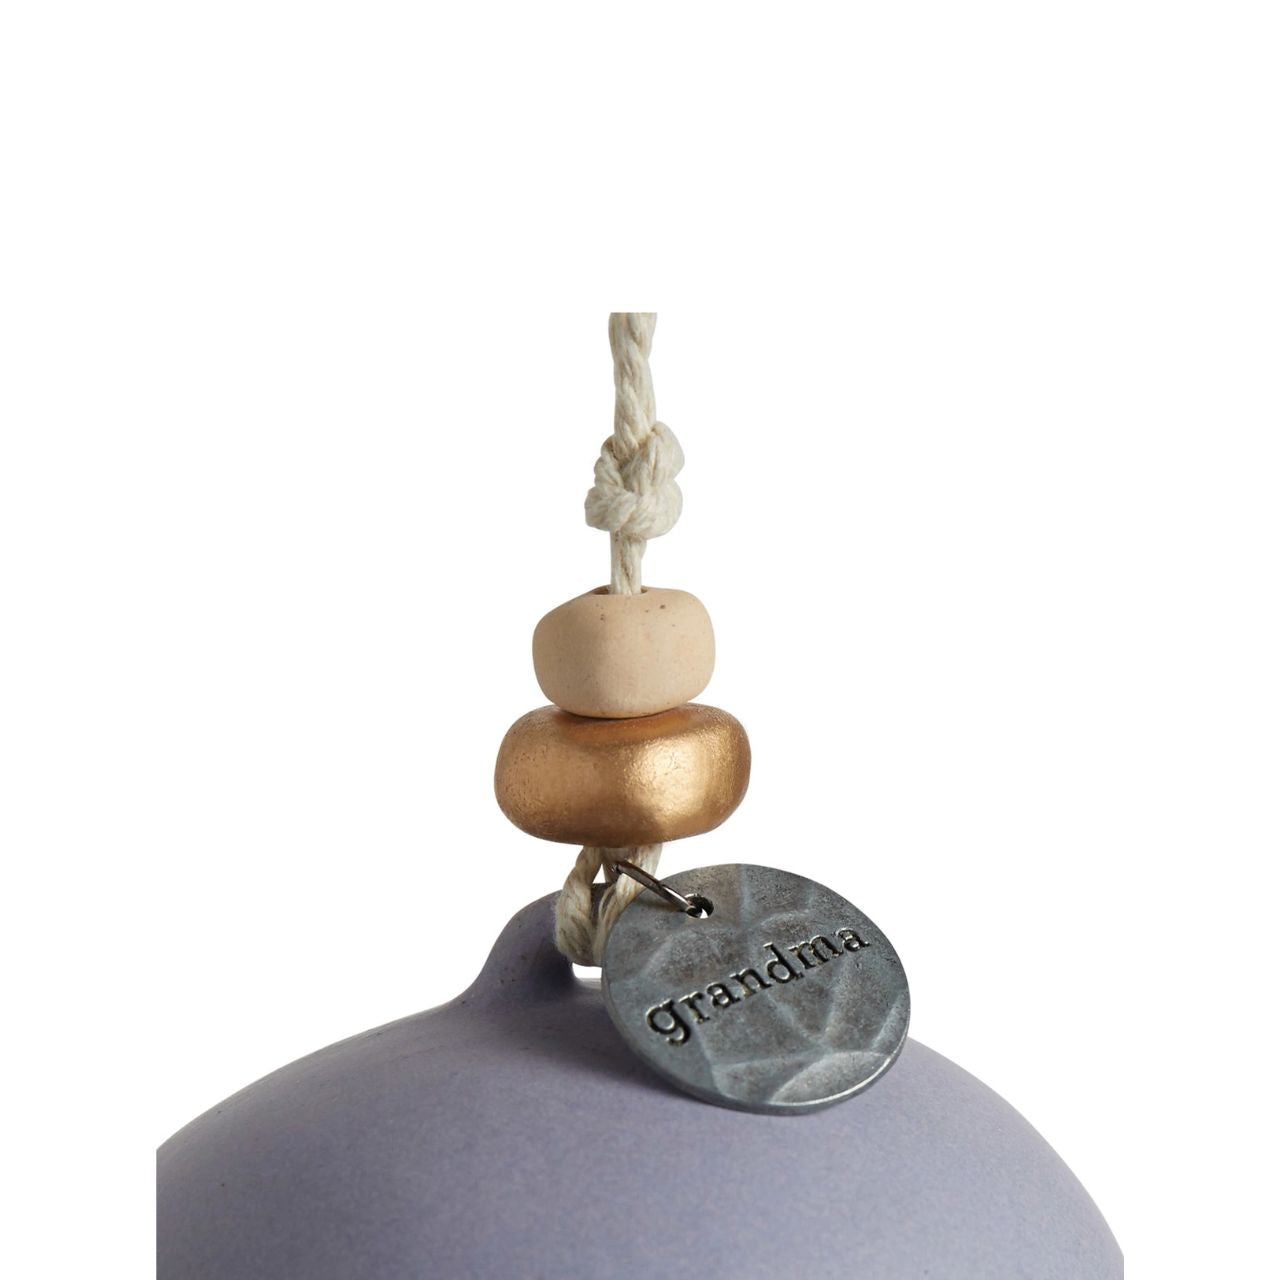 Give beauty and relaxation with our Inspired Bells collection, a selection of artisan bells in soft, serene colours with soothing, gentle rings bearing sentiments of faith and love. Our Inspired Bell - Grandma is a ceramic indoor/outdoor bell in lavender and white with a heart pull and a heart cut out.